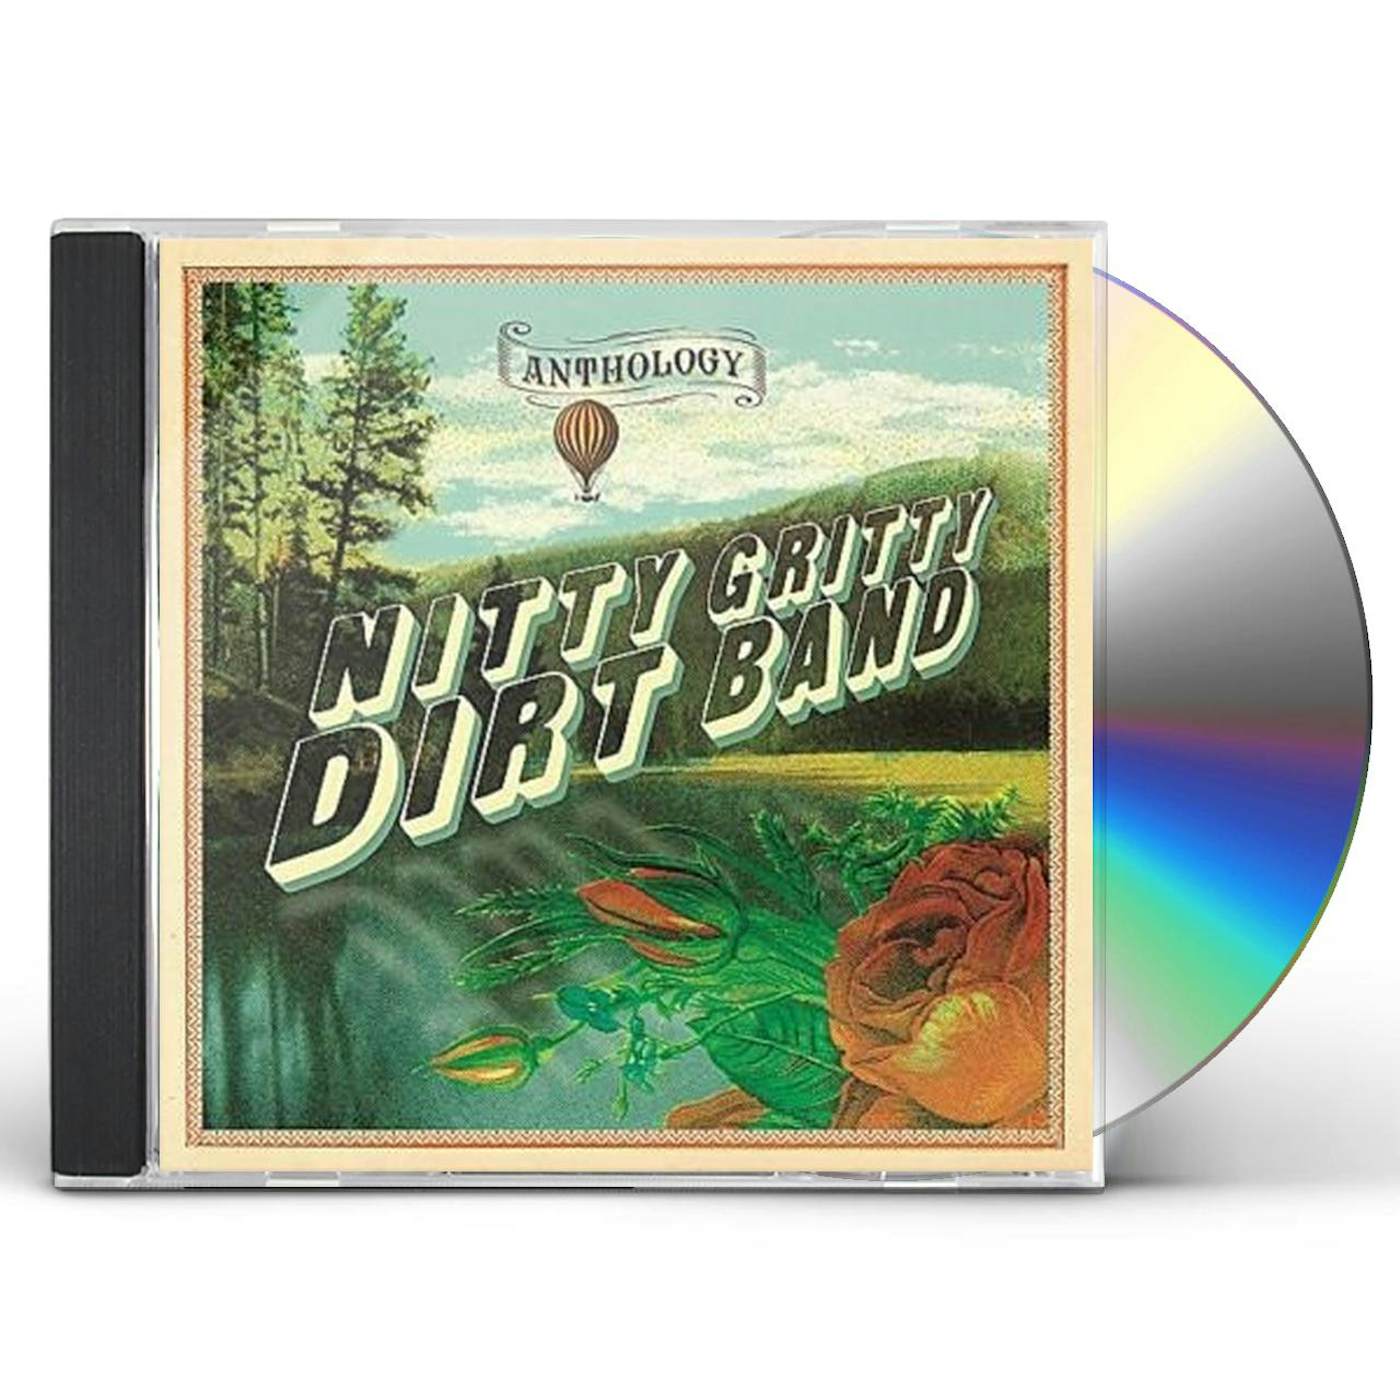 fishin in the dark: best of nitty gritty dirt band cd